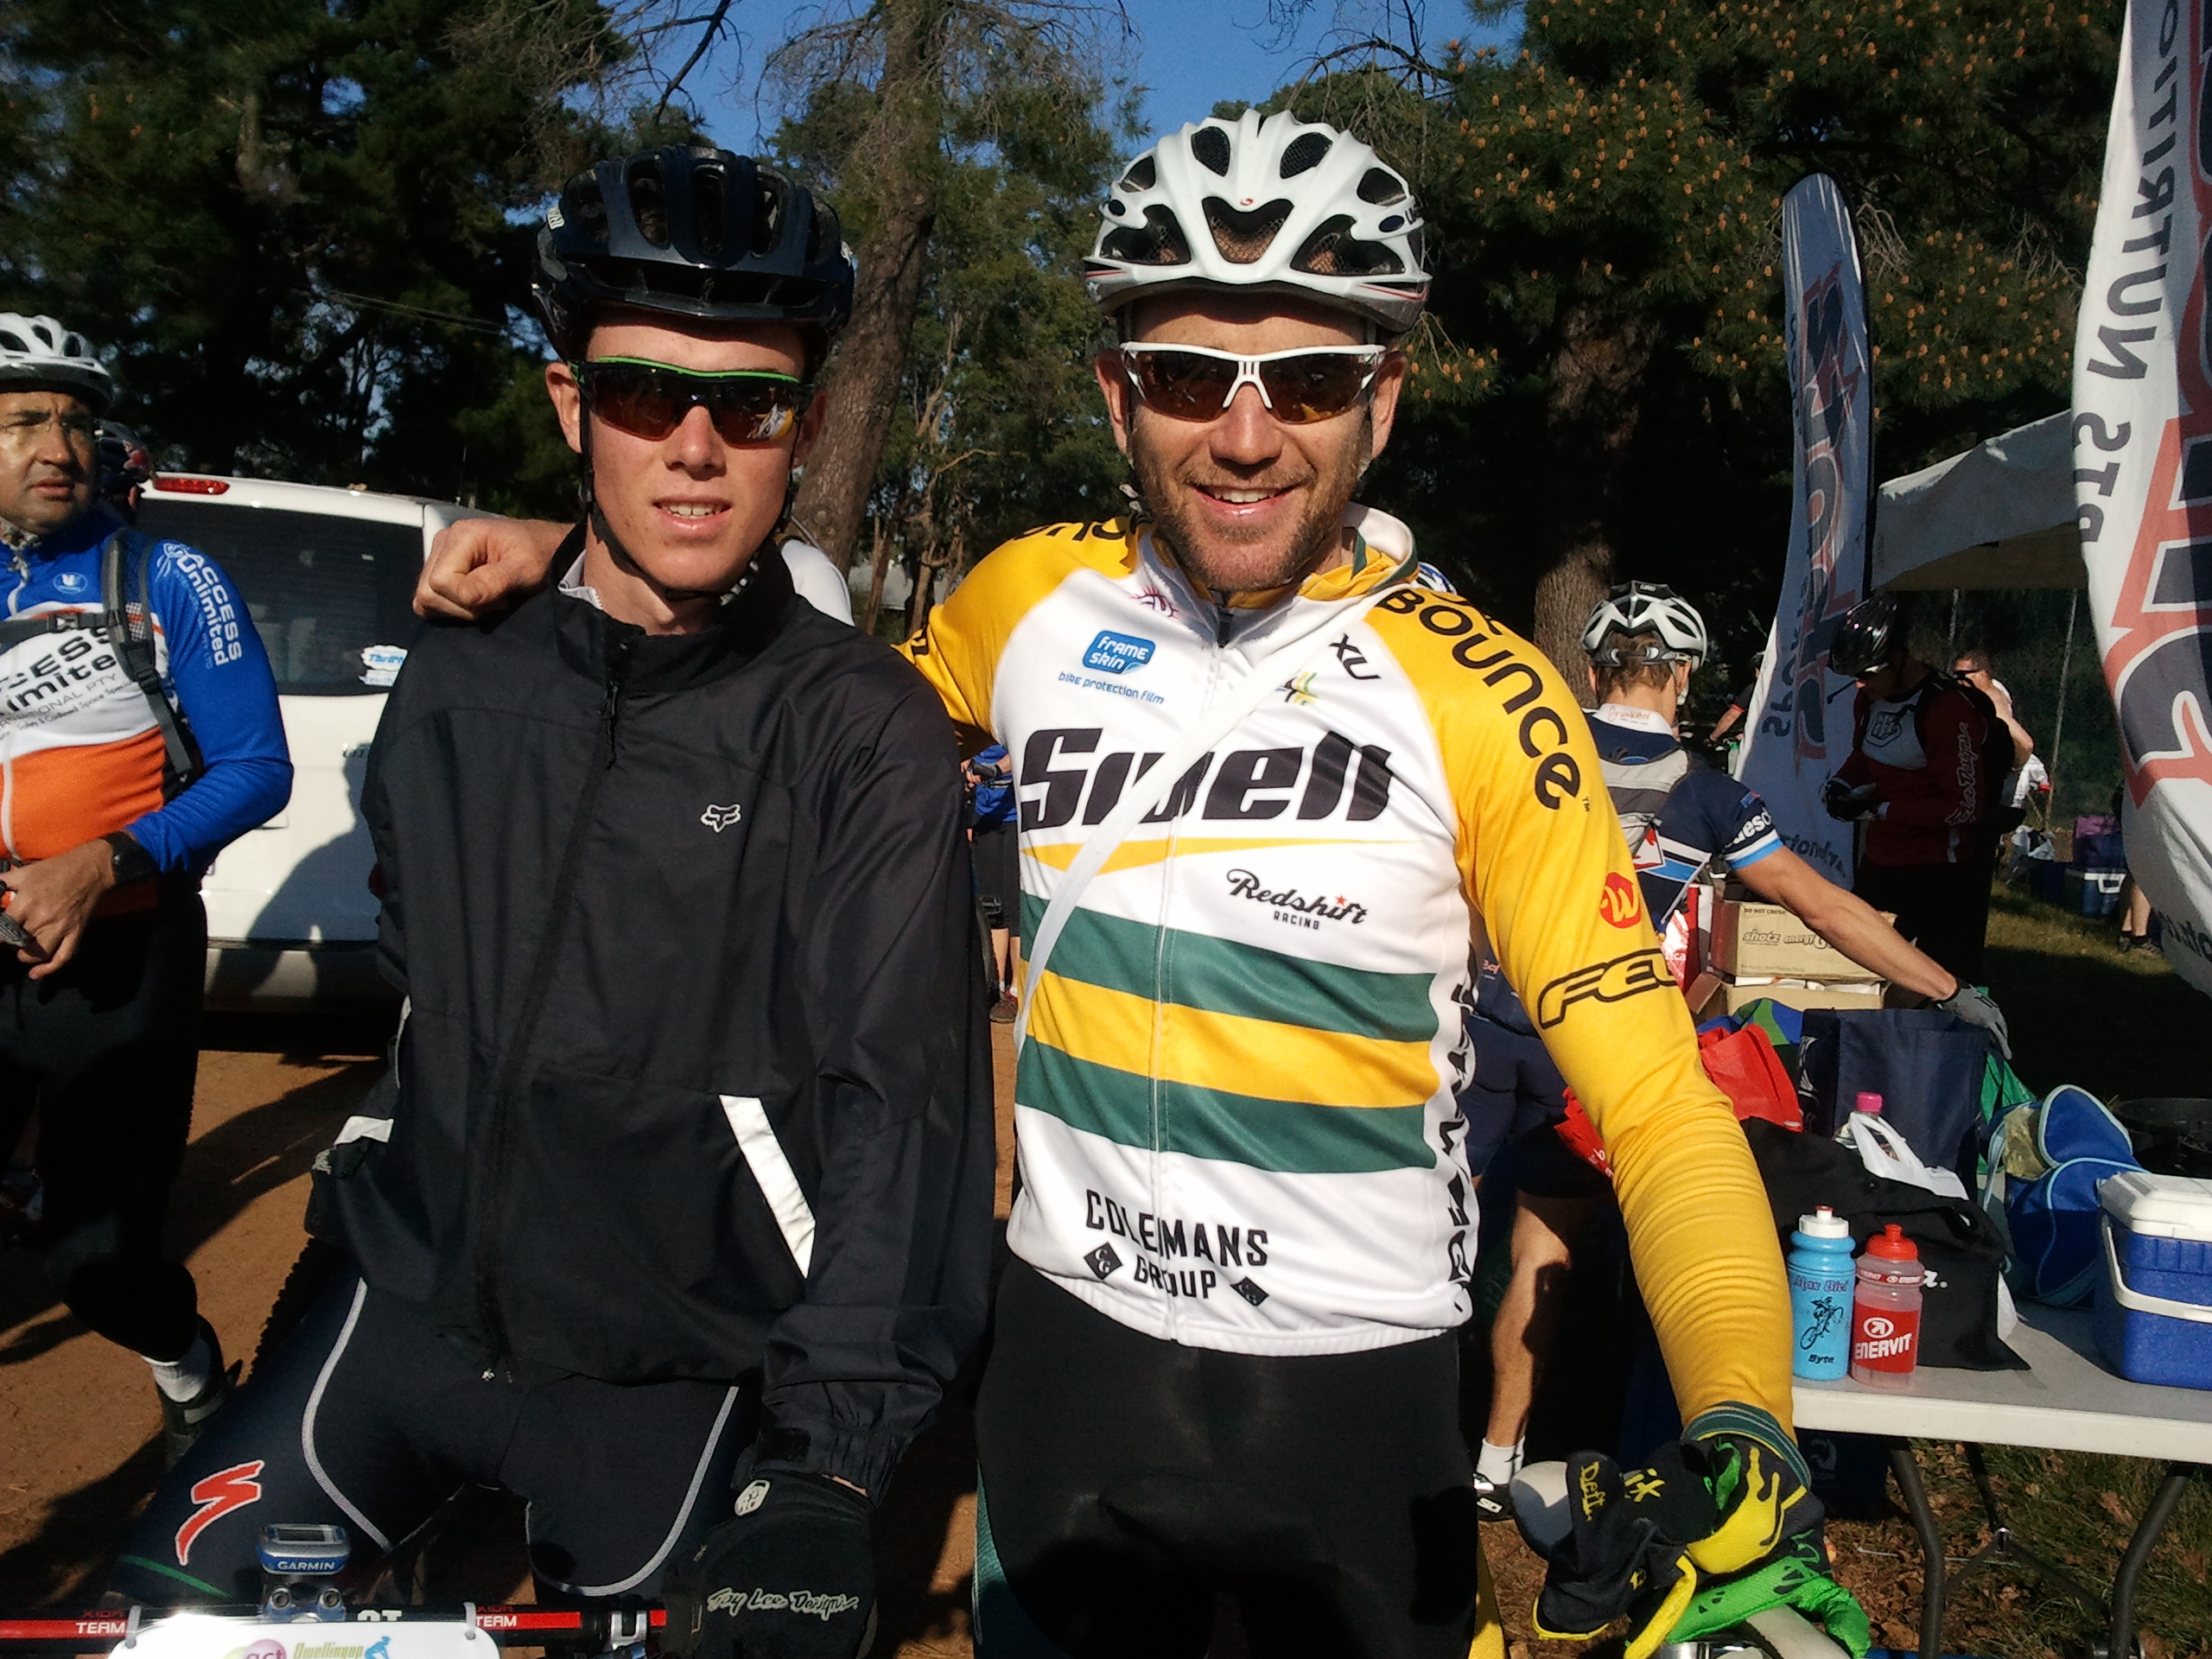 Reece and Andy at the start of the Dwellingup 100.